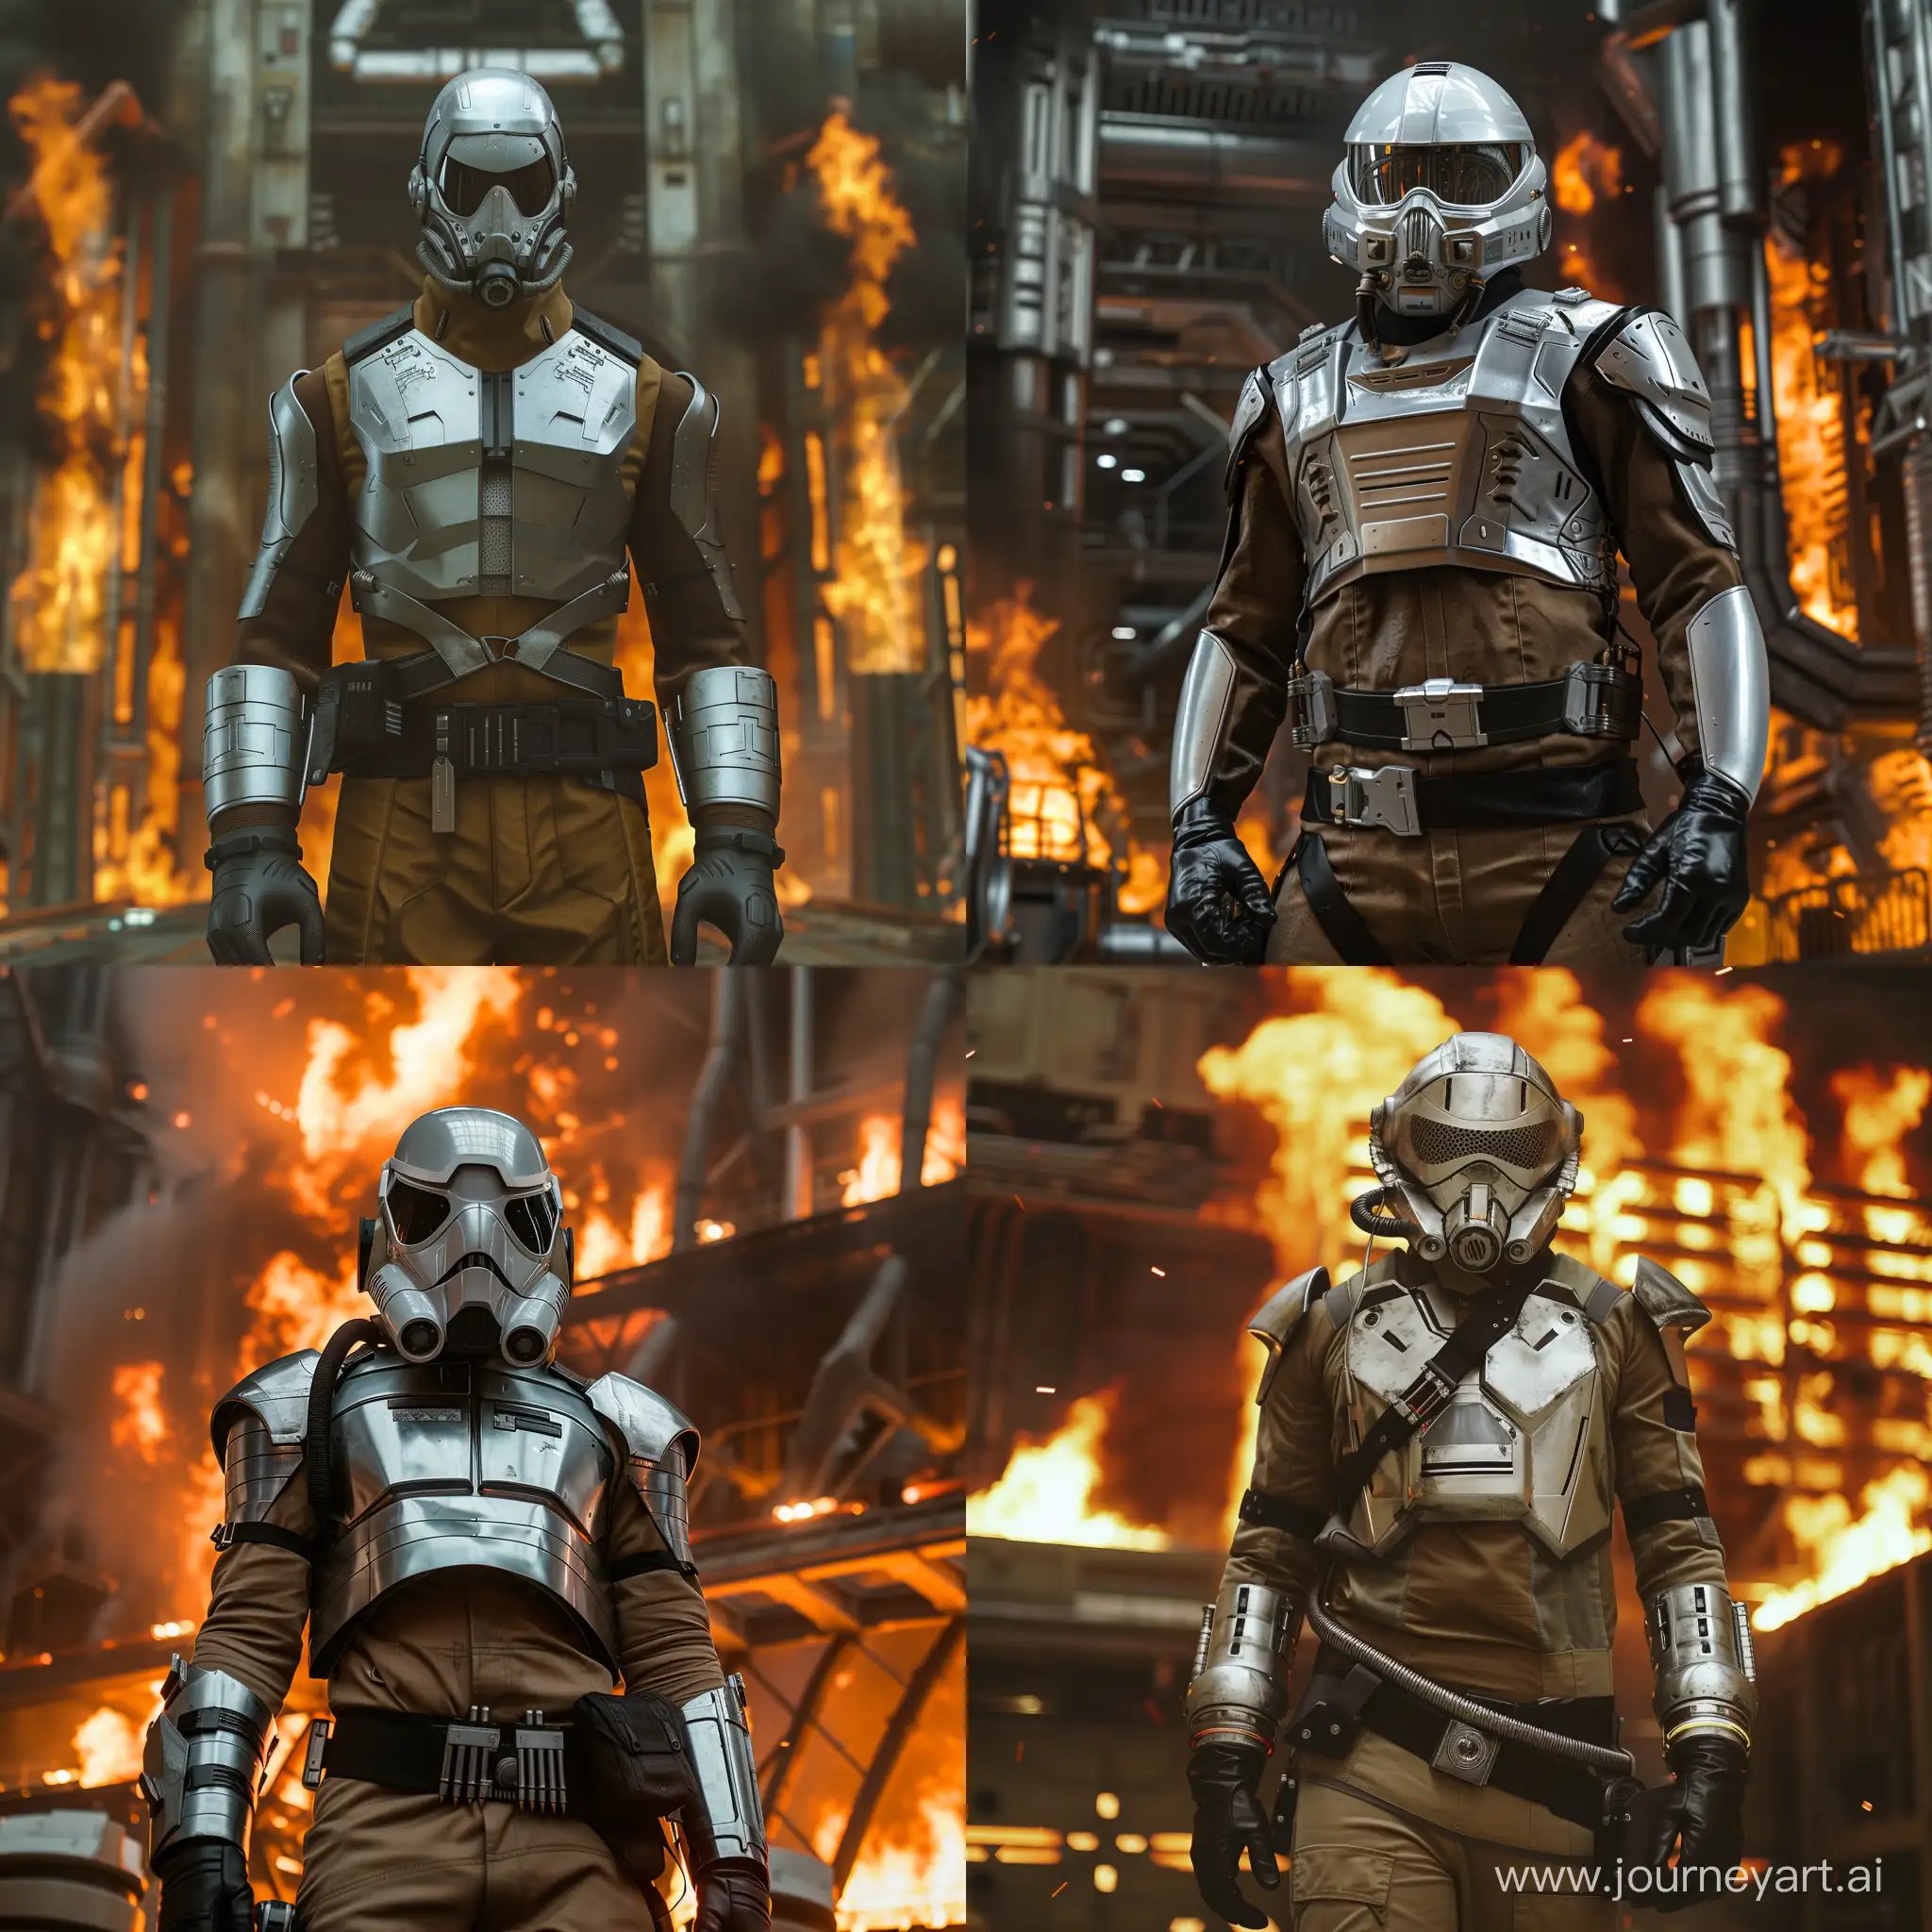 Futuristic-Soldier-in-Silver-Armor-Amidst-Space-Station-Fire